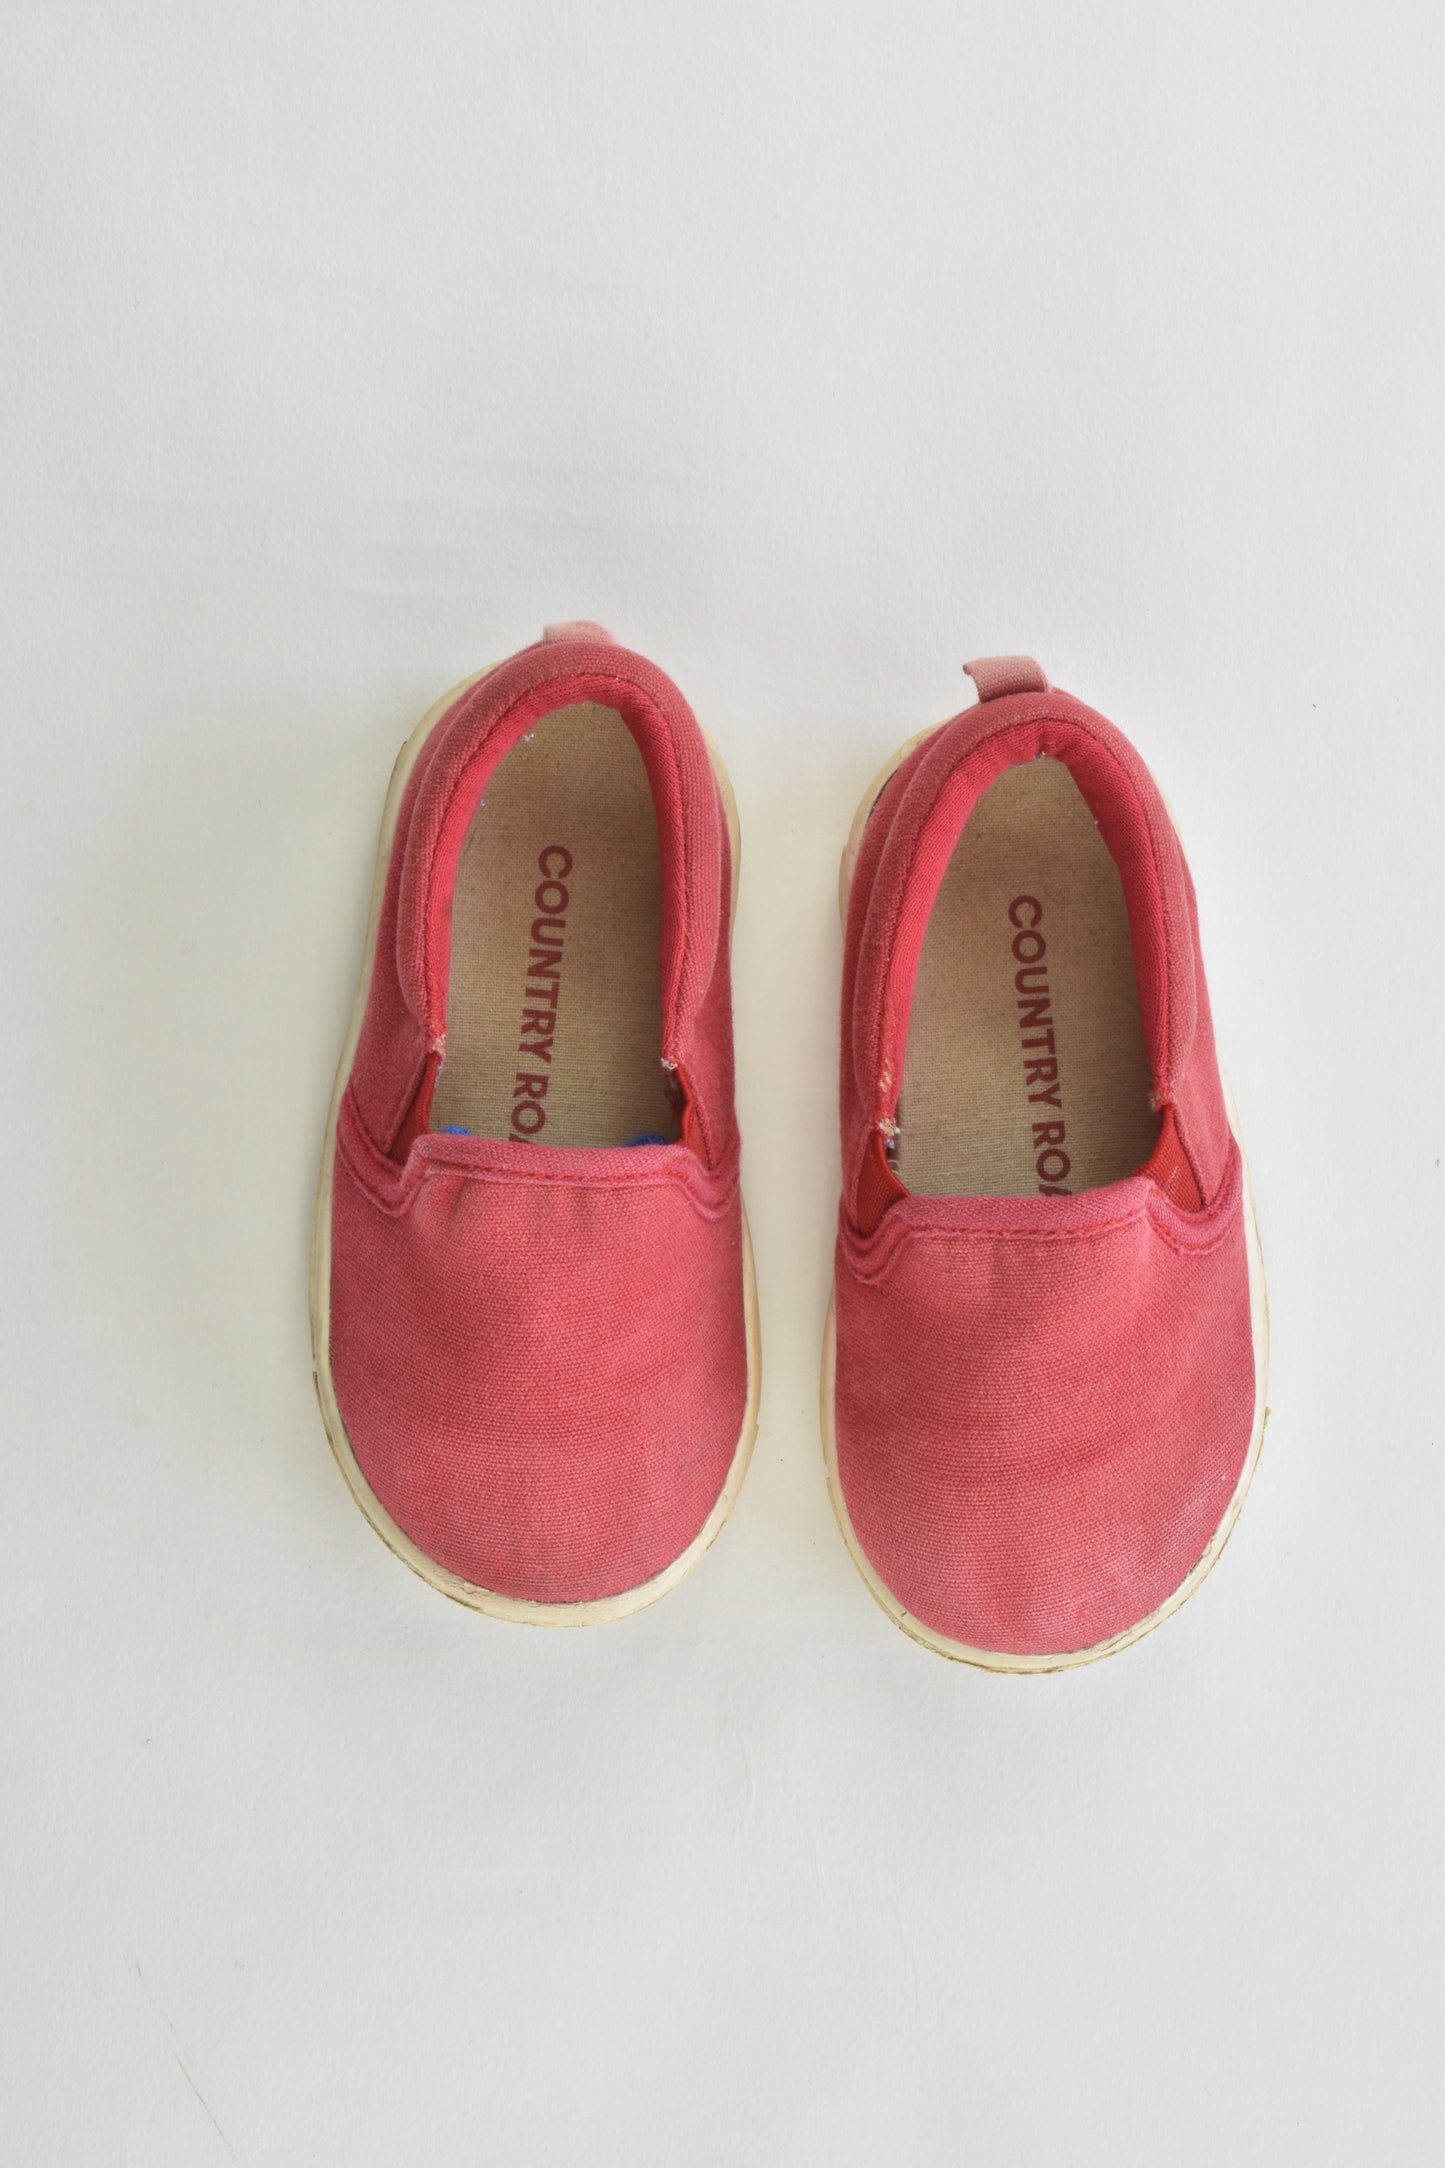 Country Road Size 22 (18-24 months) Canvas Shoes